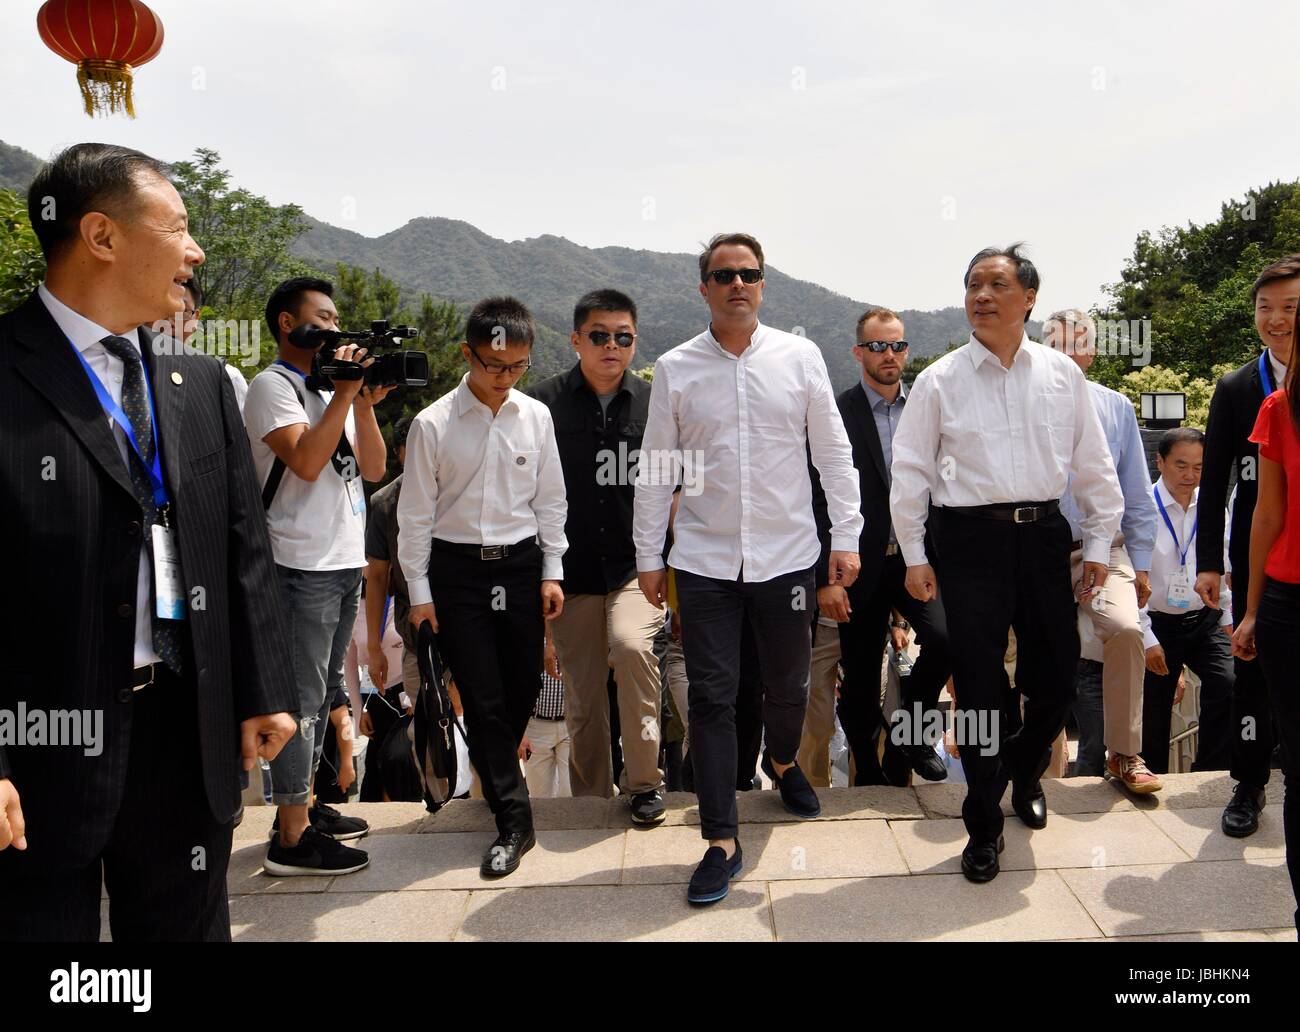 Beijing, China. 11th June, 2017. Luxembourg's Prime Minister Xavier Bettel (C), who is paying an official visit to China, visits the Mutianyu section of the Great Wall in Beijing, capital of China, June 11, 2017. Credit: Jin Liangkuai/Xinhua/Alamy Live News Stock Photo